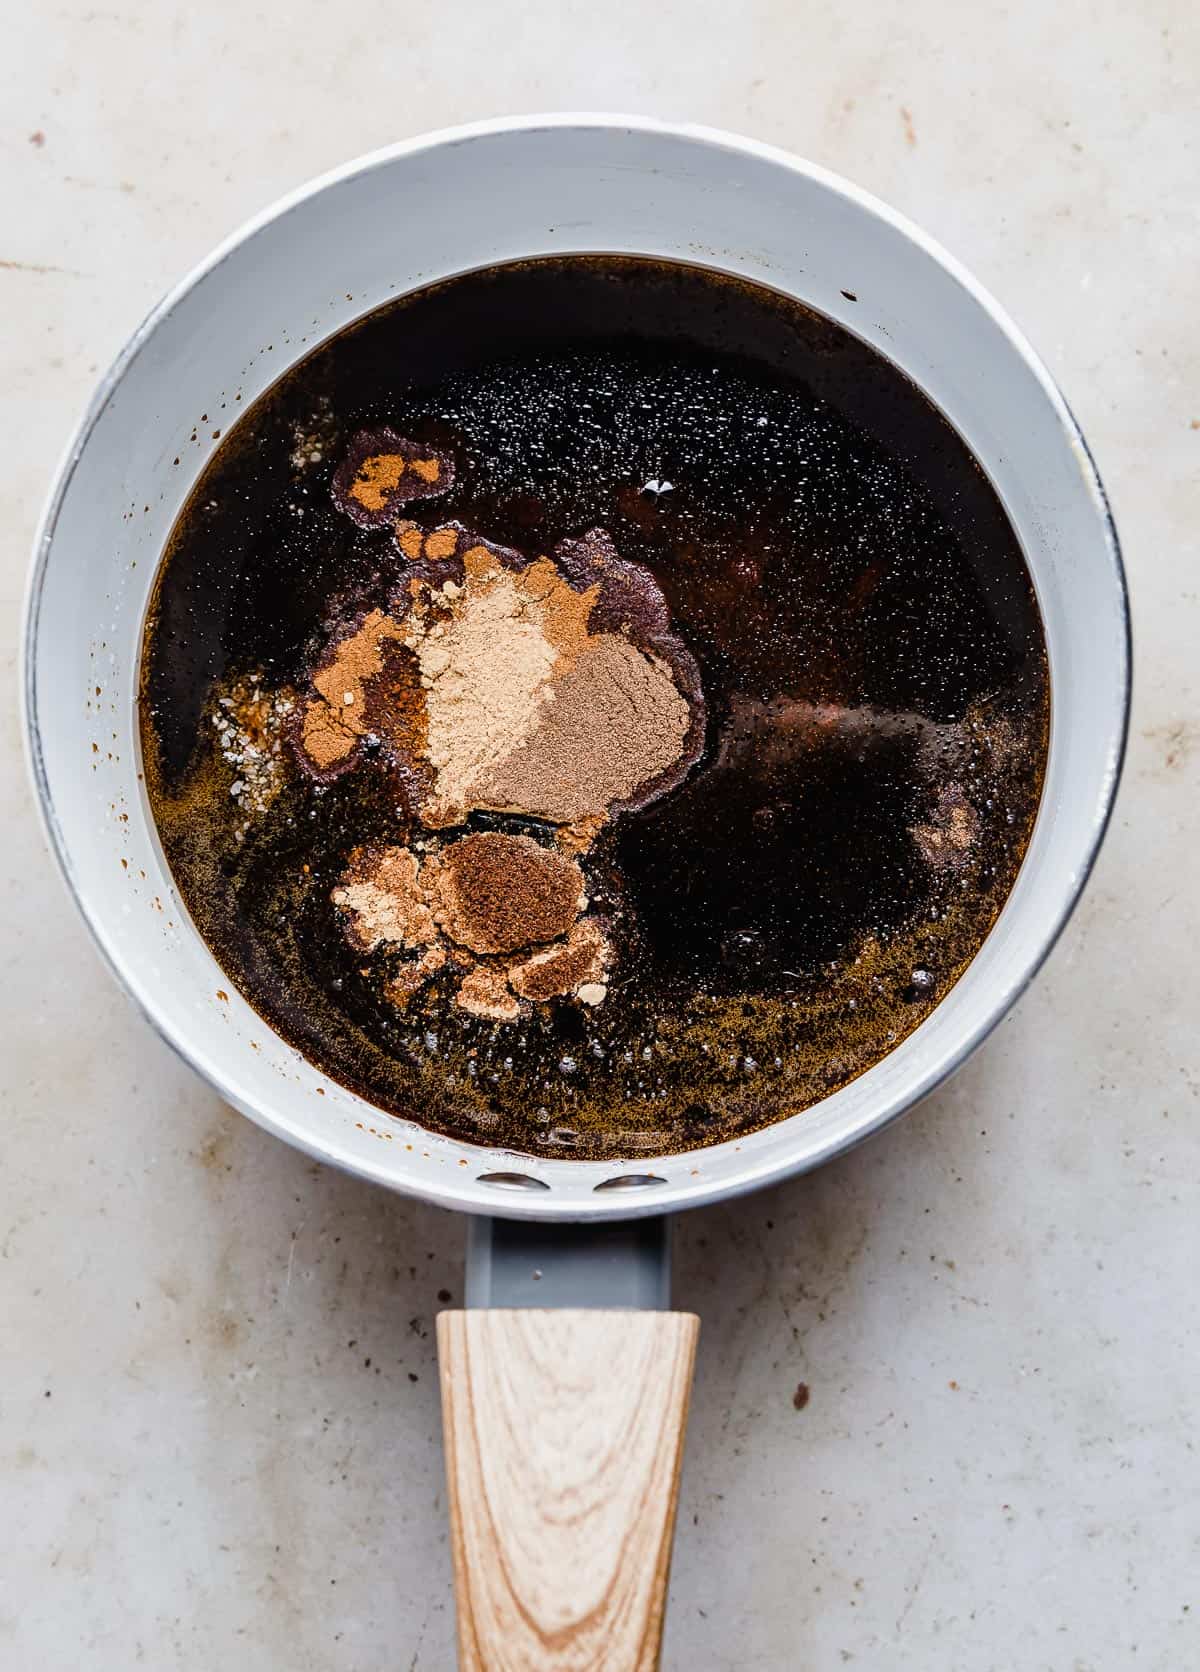 A dark liquid mixture in a white saucepan with gingerbread spices on top of the liquid.